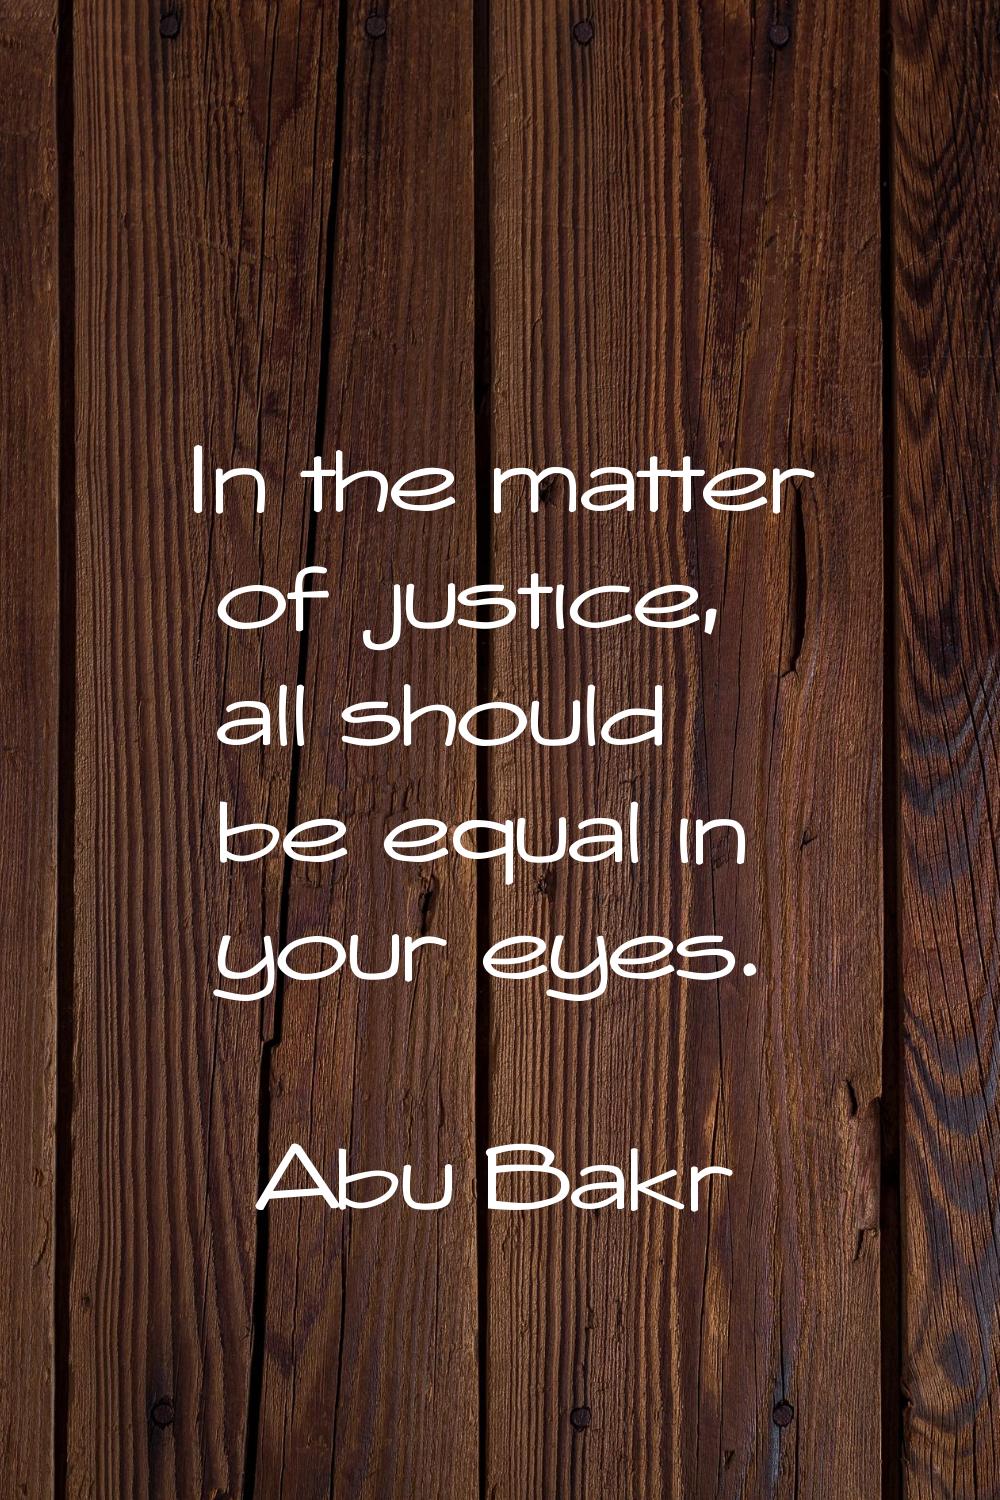 In the matter of justice, all should be equal in your eyes.